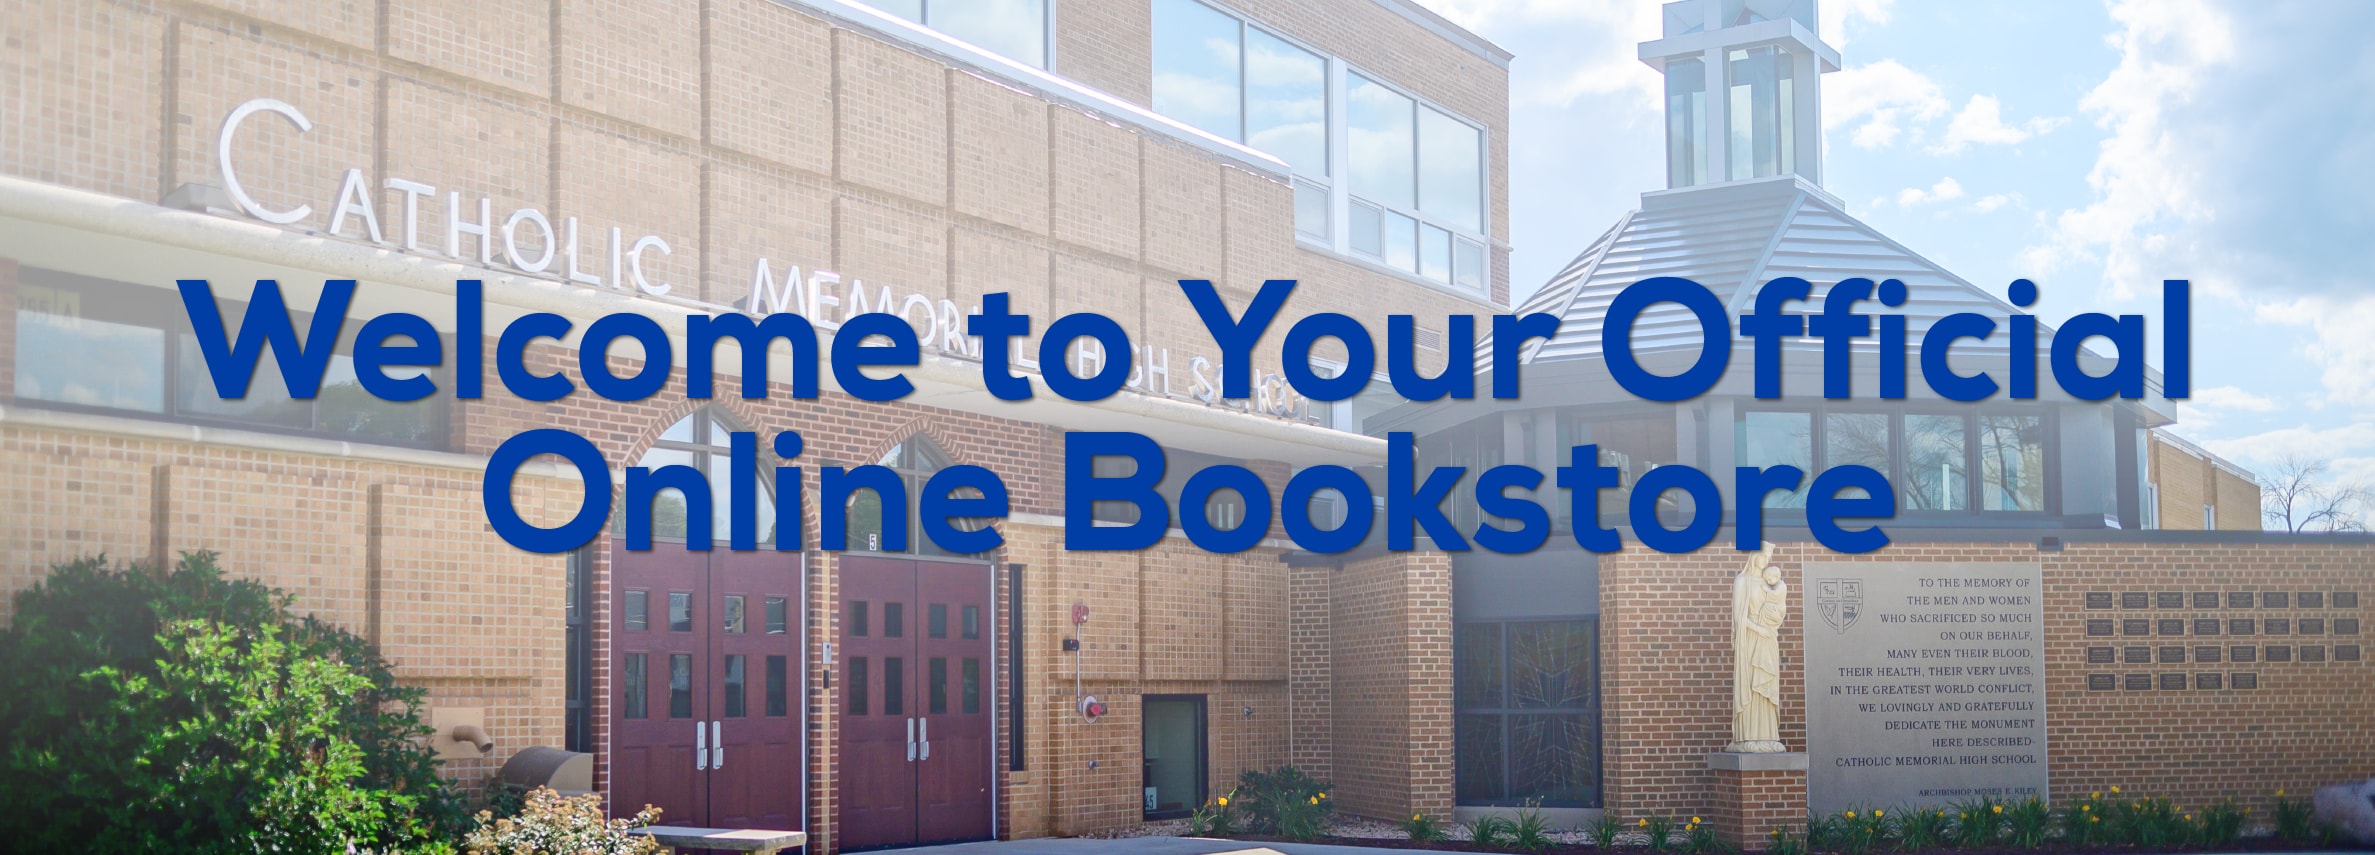 Welcome to your official online bookstore